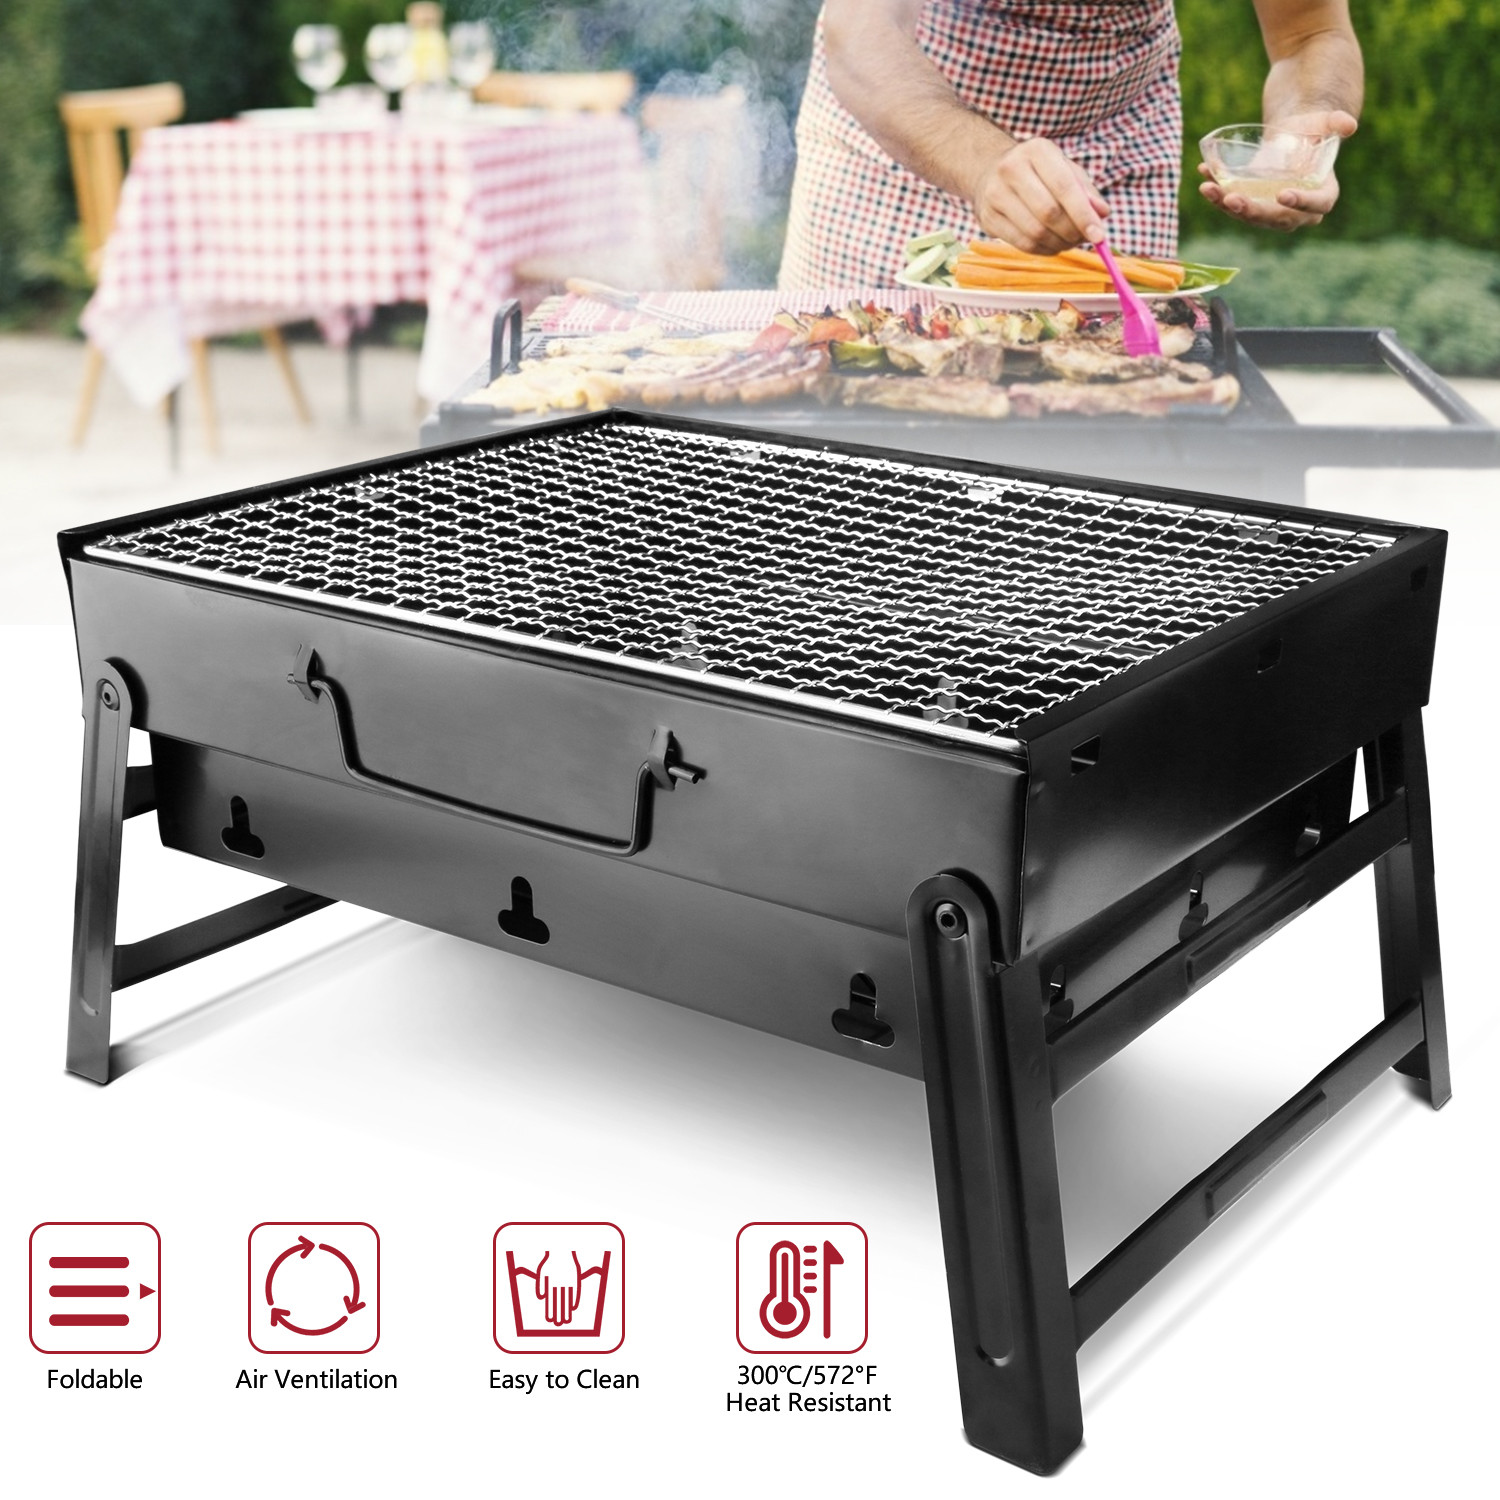 Htwon 13.7" Foldable BBQ Charcoal Grill, Portable Heavy Duty Barbecue Stainless Steel Tabletop Grill Stove with Handle Outdoor Camping Picnic Barbecue BBQ Accessories Tools - image 2 of 14